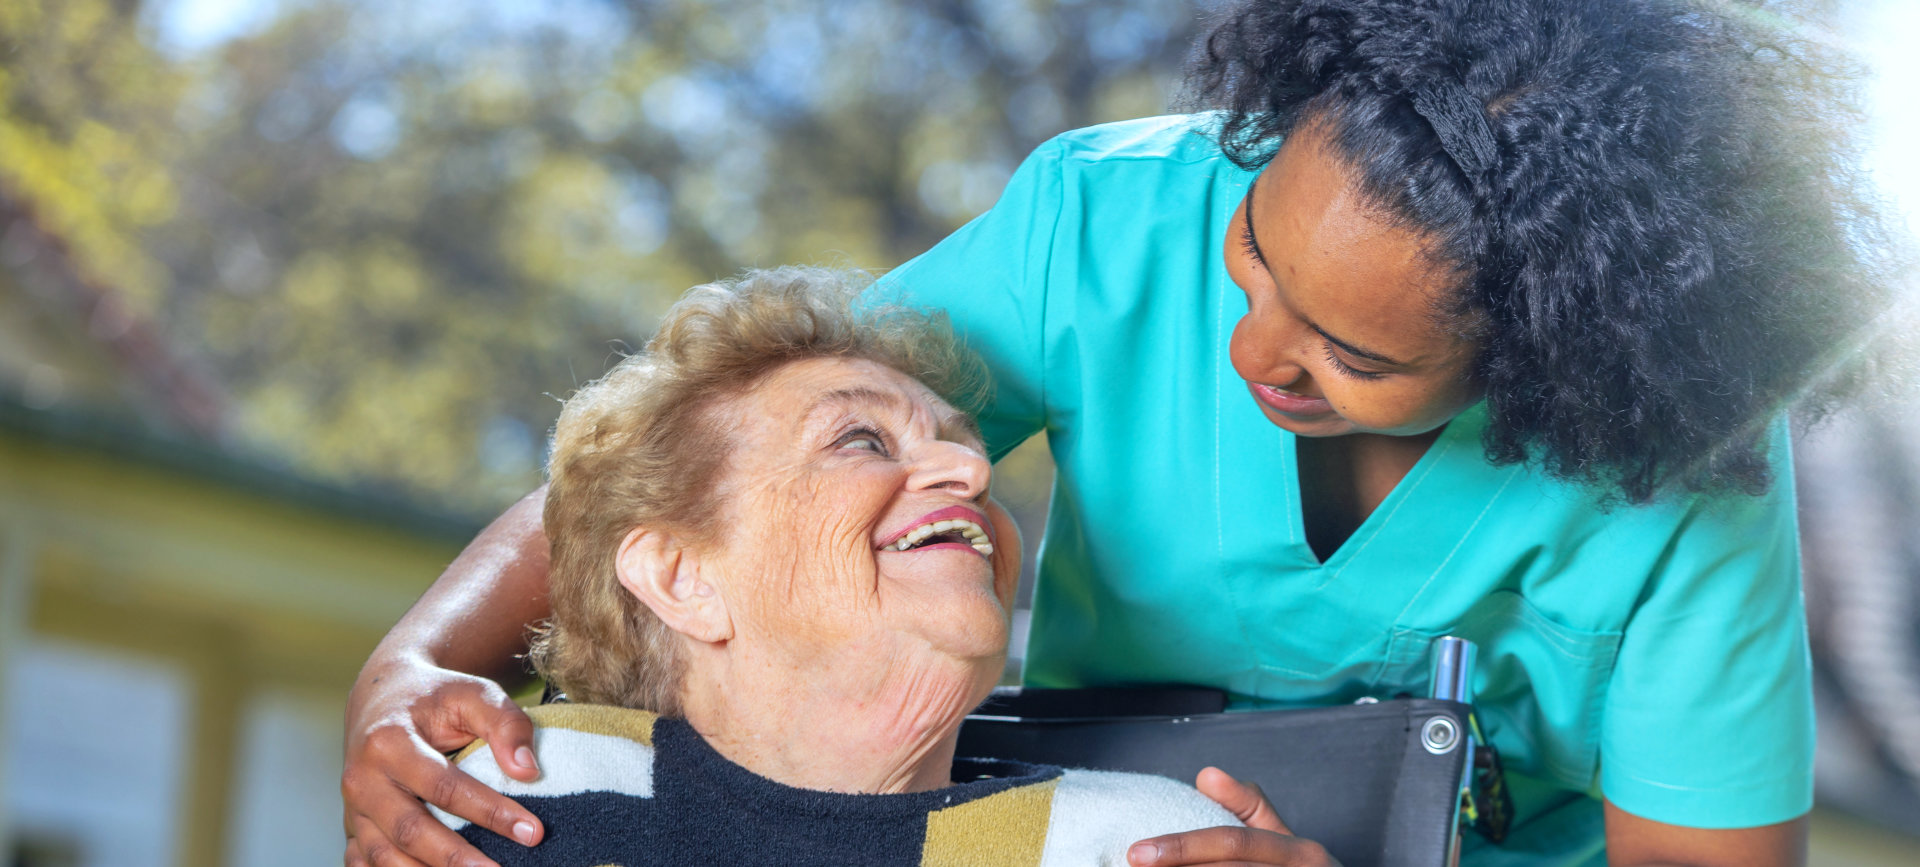 staff and elderly woman on a wheelchair smiling while looking at each other